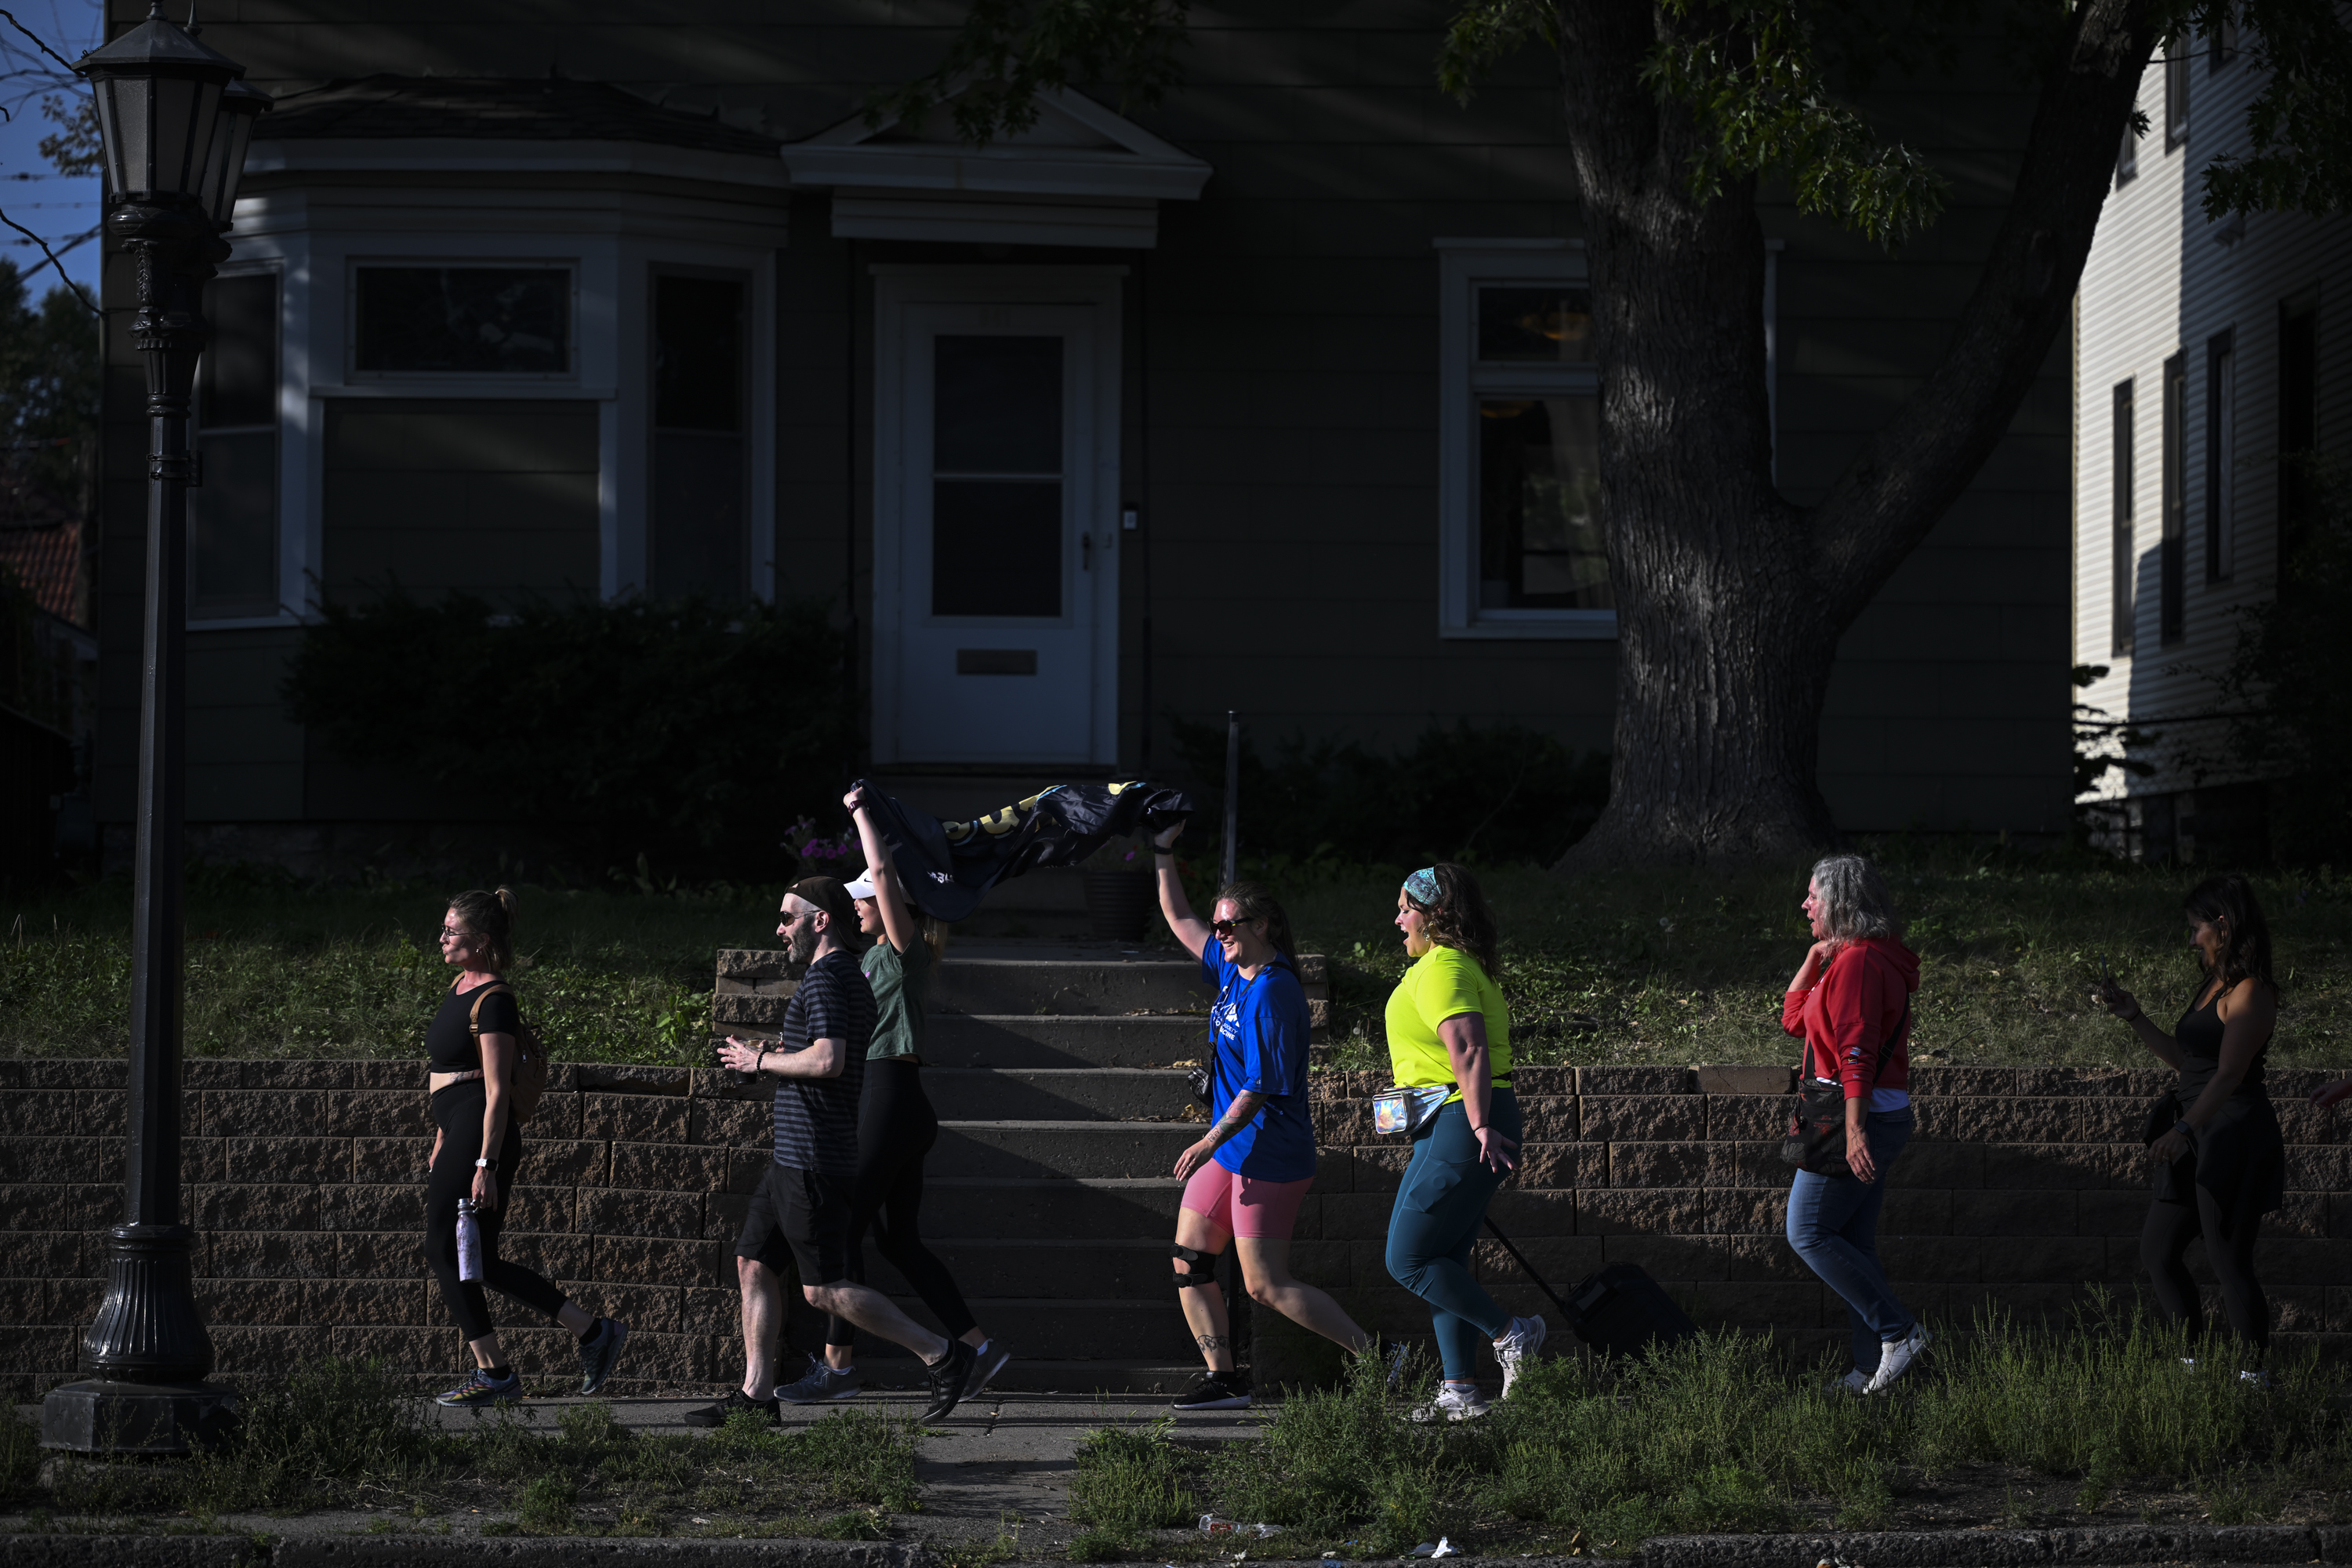 Dancing while walking has become a regular sight in St. Paul